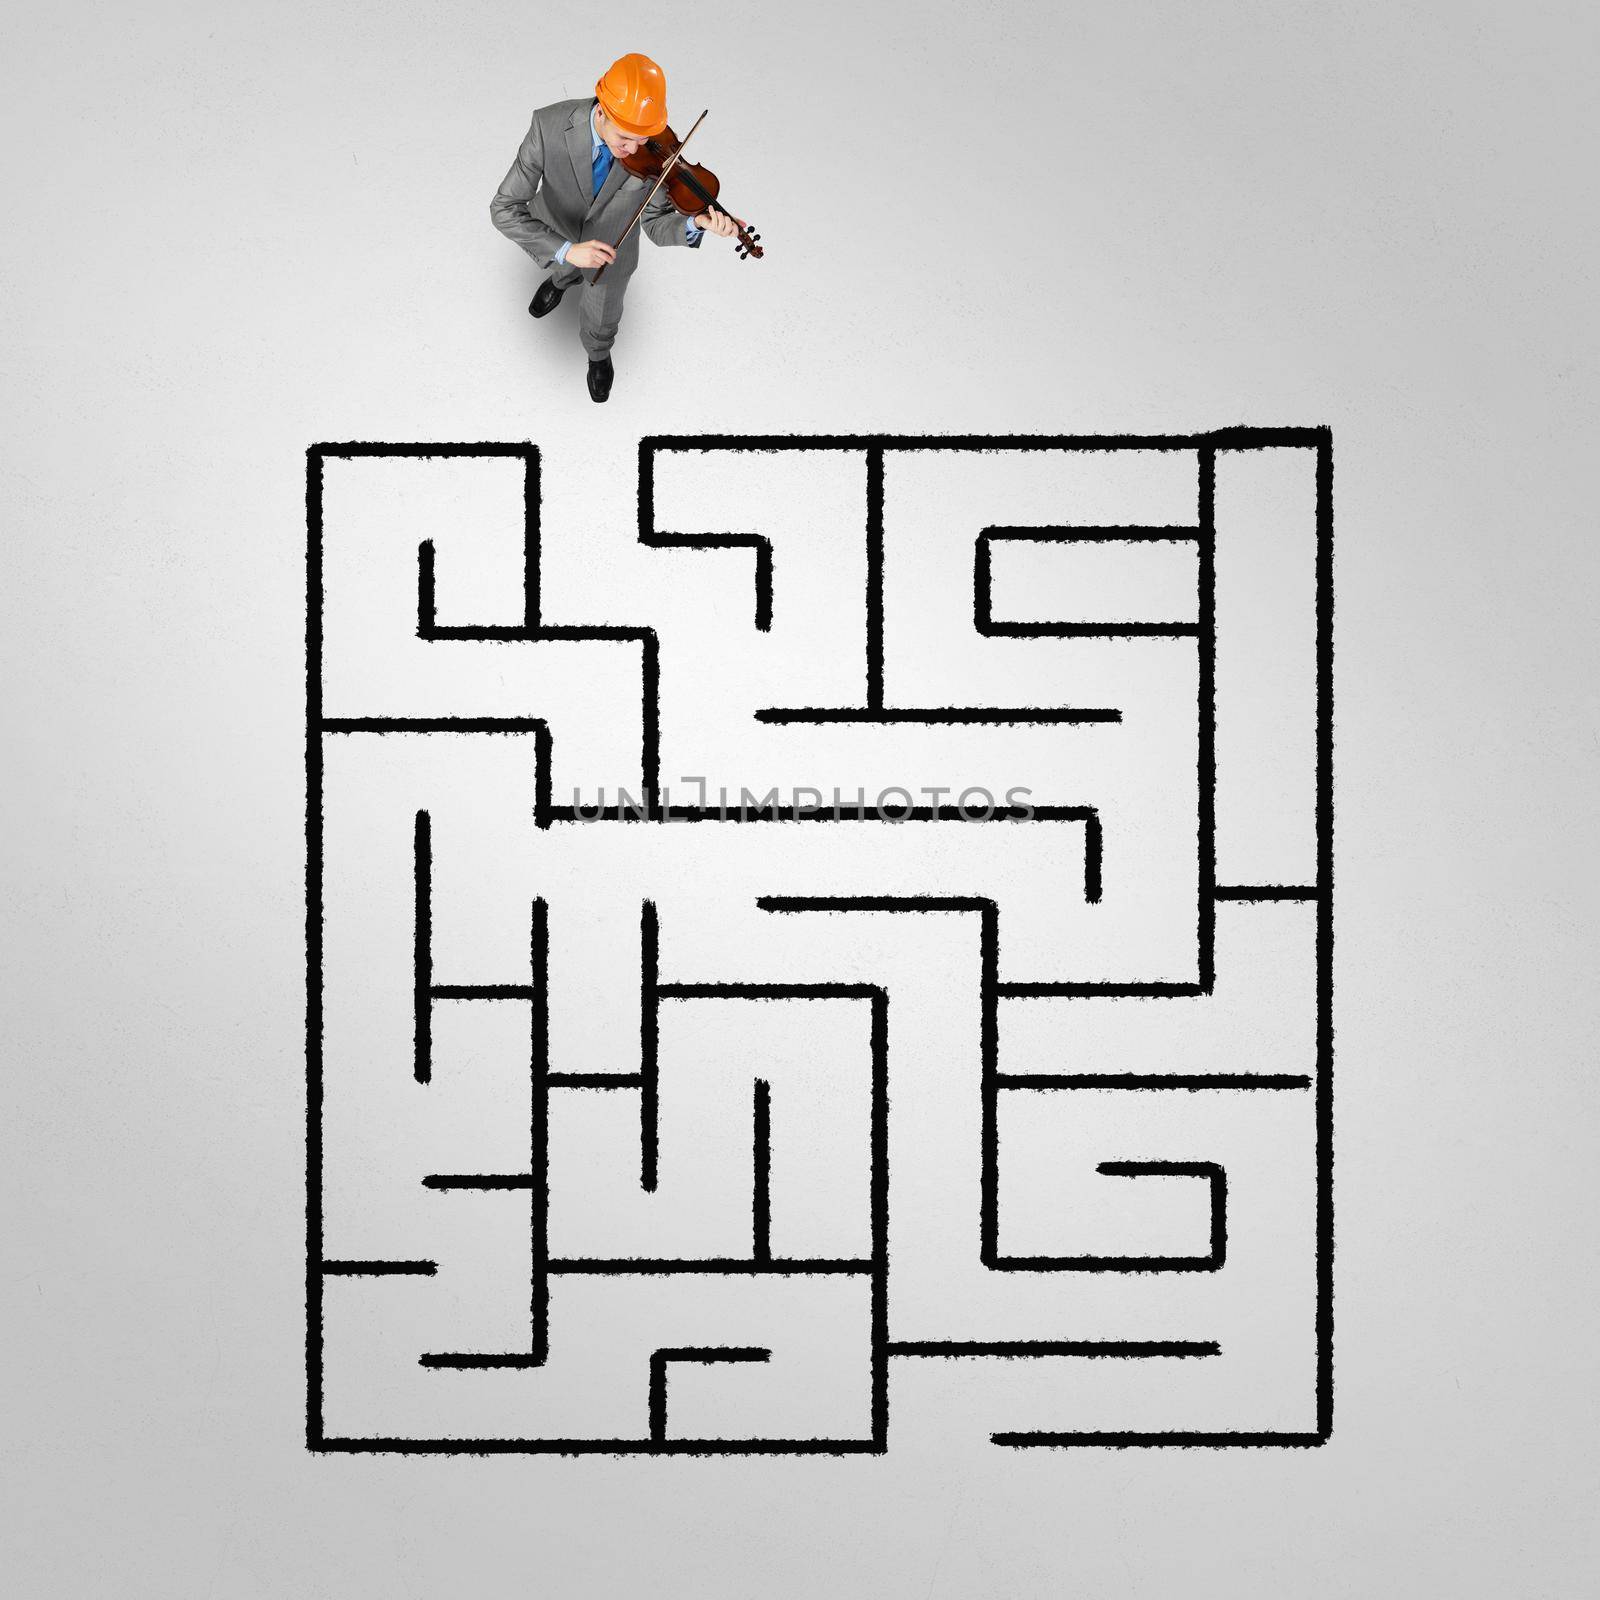 Top view of businessman playing violin and drawn labyrinth on floor